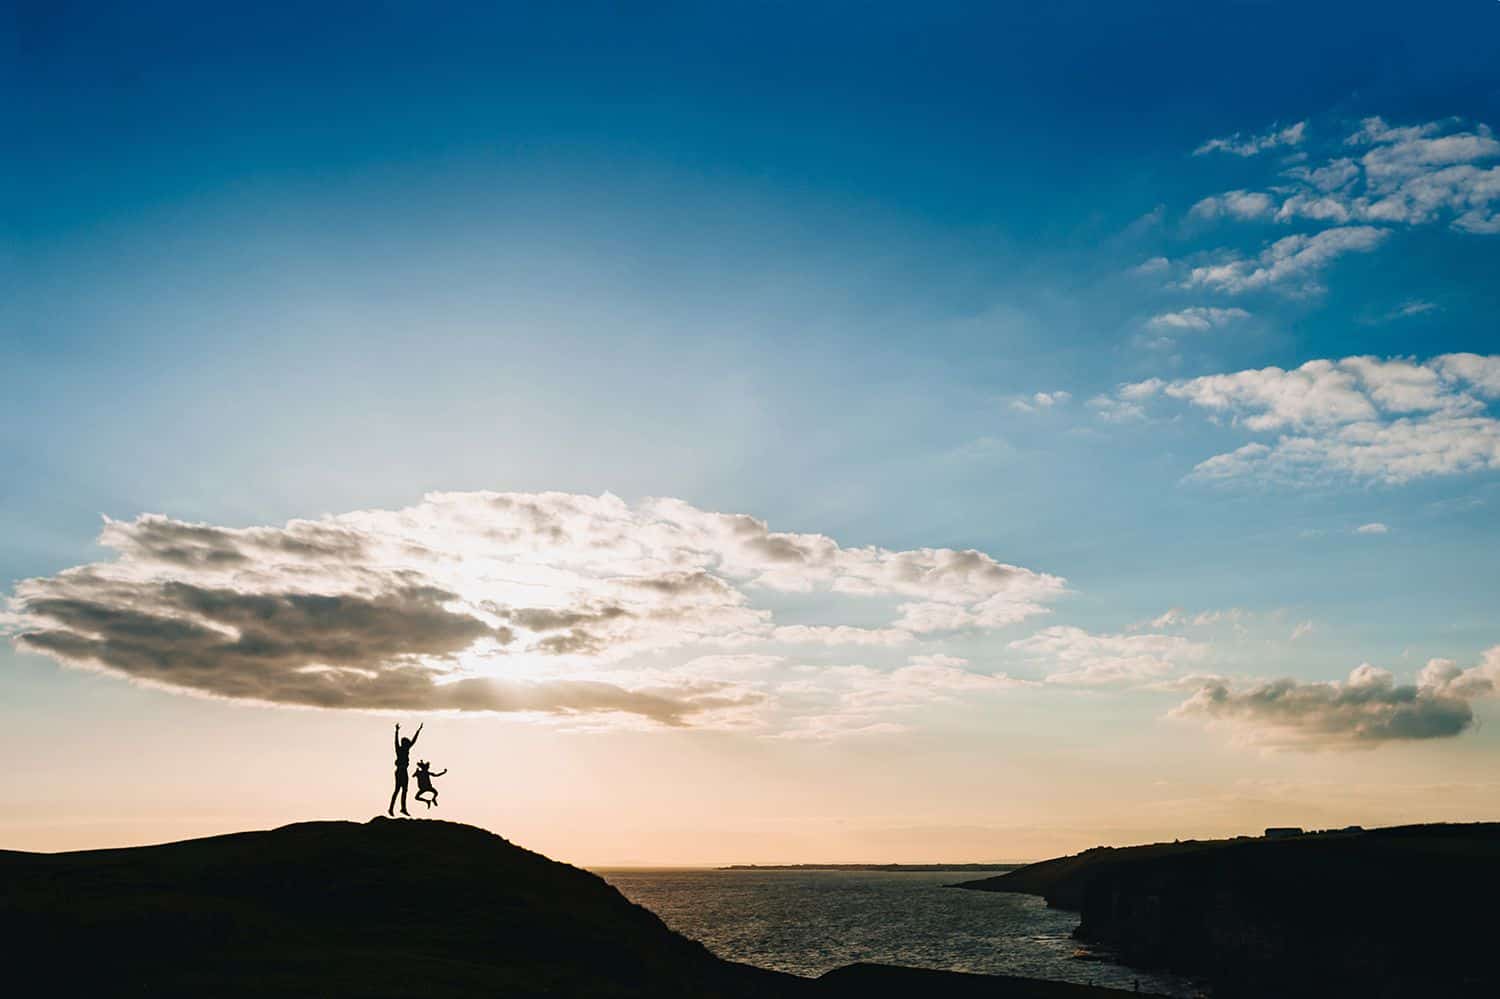 Silhouette of a parent and a child jumping on a hill overlooking the ocean.